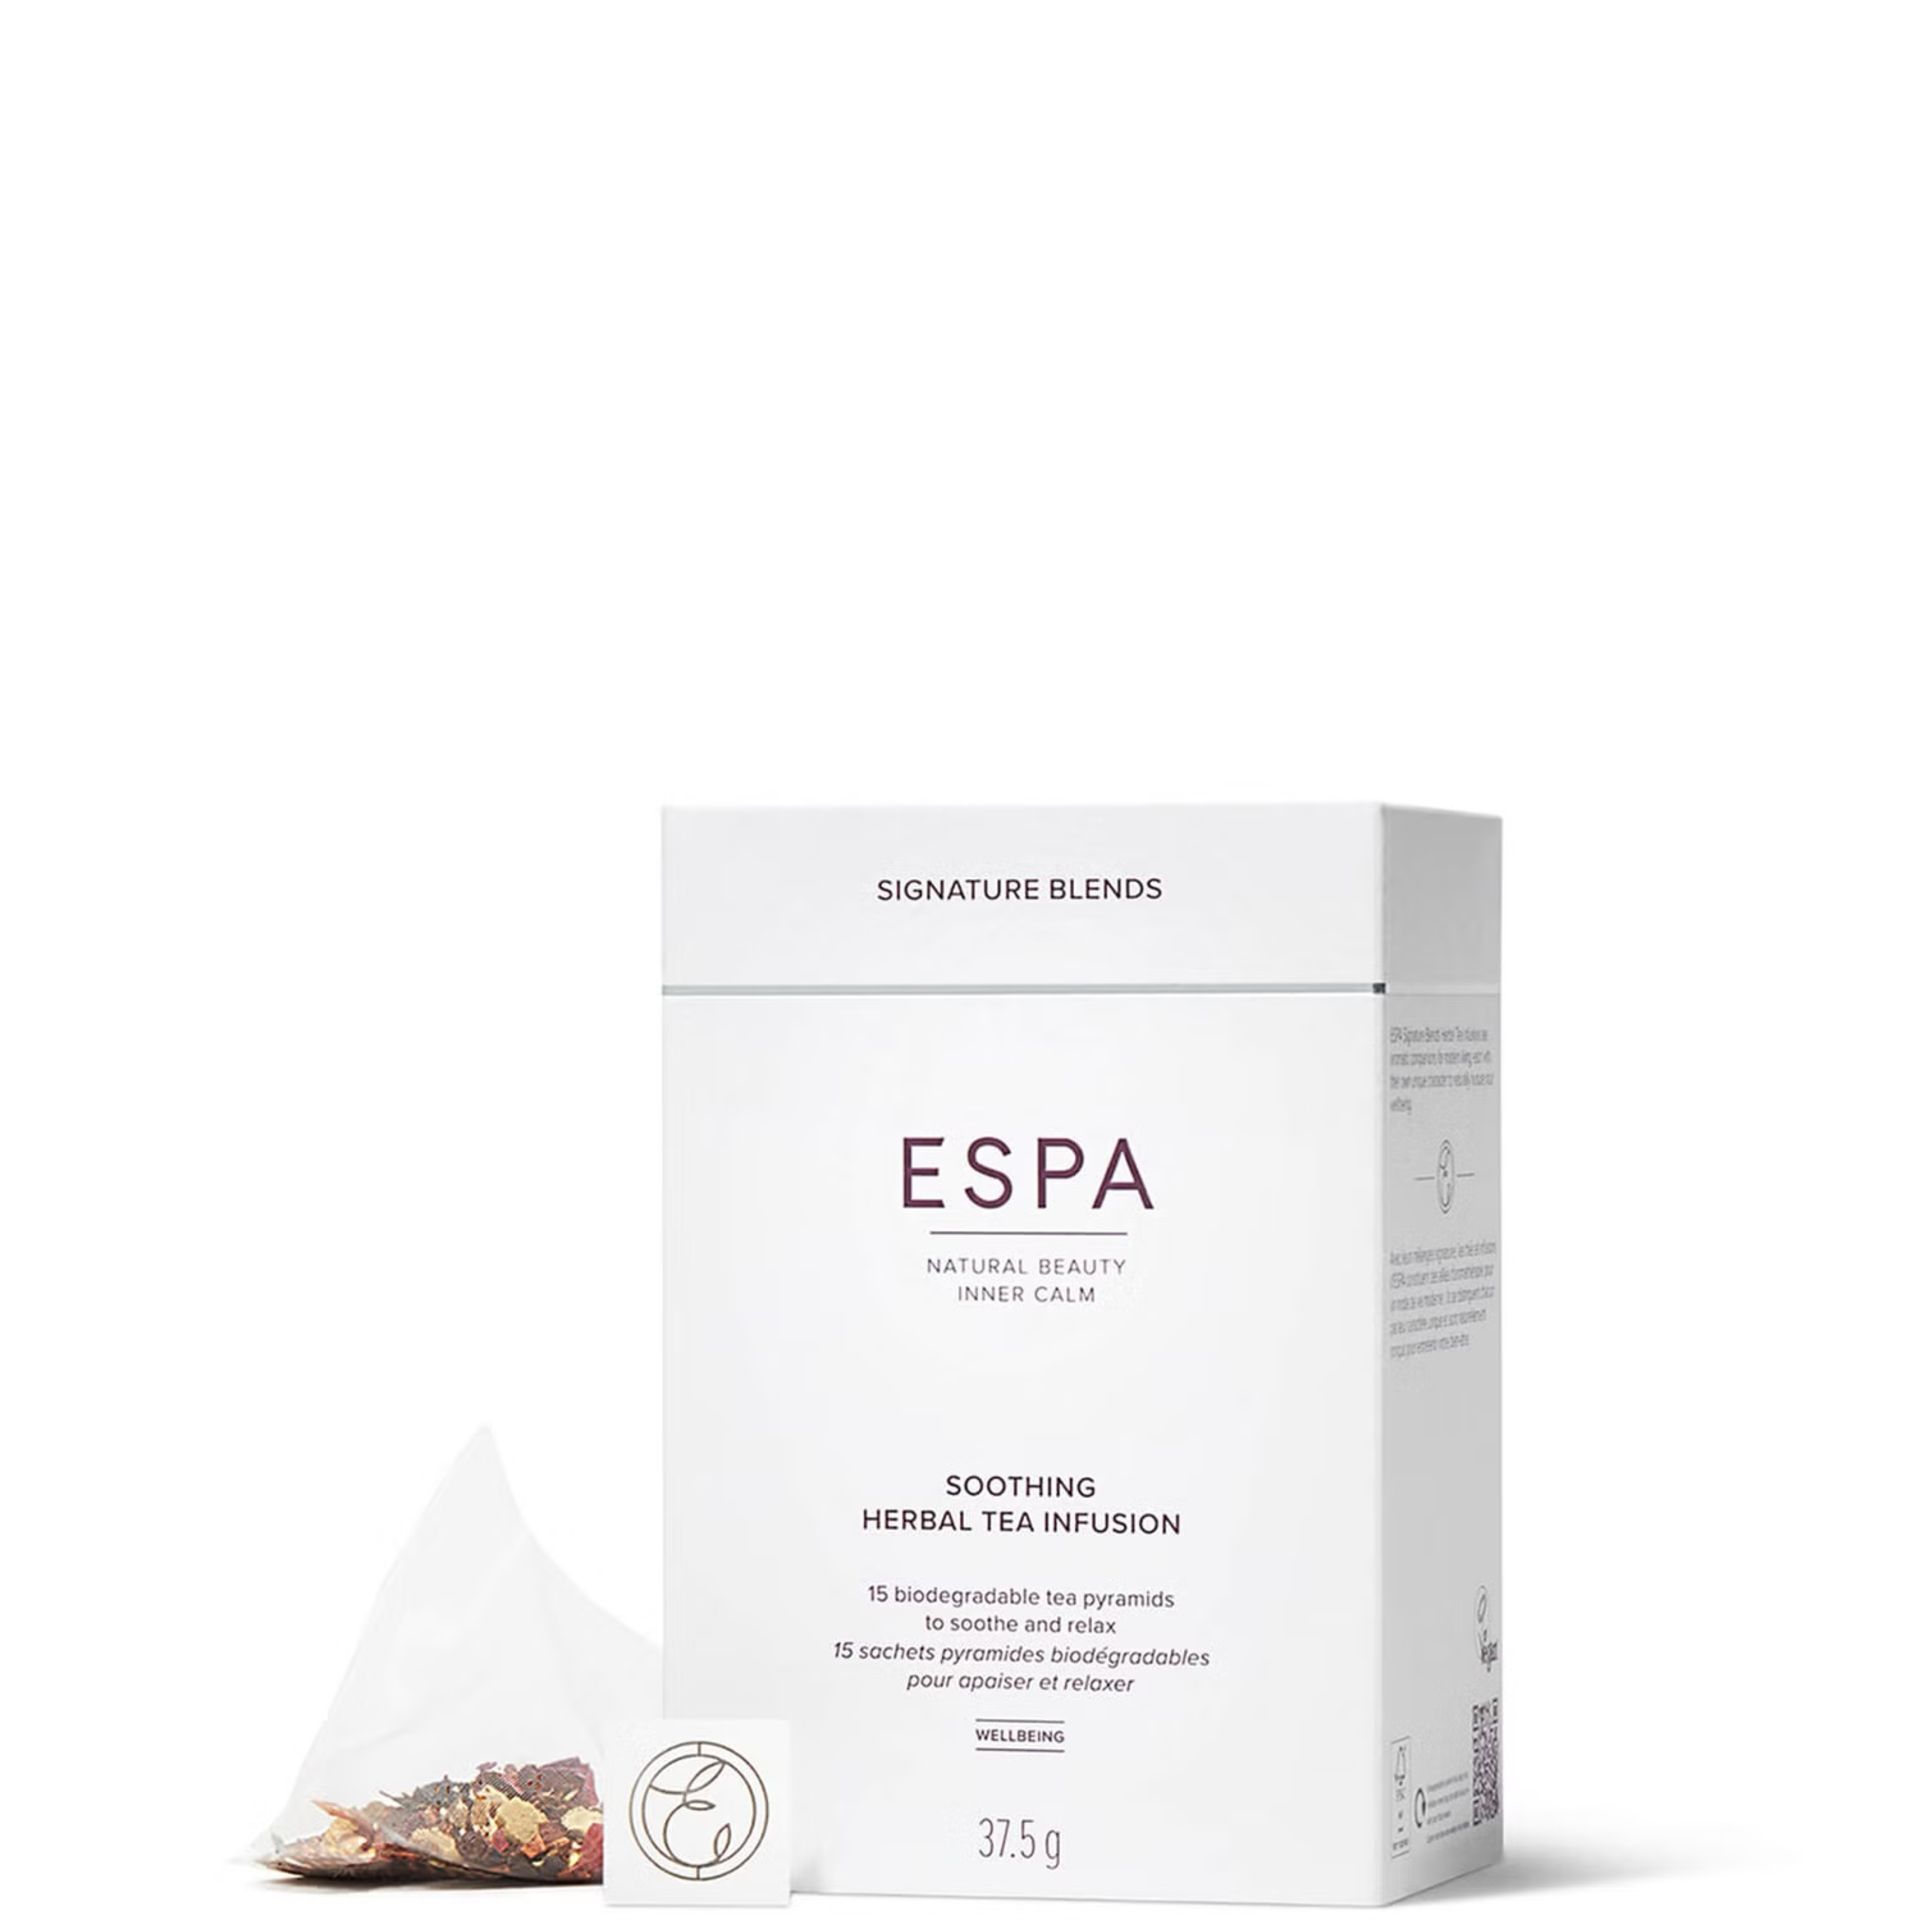 TRADE LOT TO CONTAIN 80x NEW & BOXED ESPA Soothing Herbal Tea Infusion 37.5g. RRP £15 EACH. (